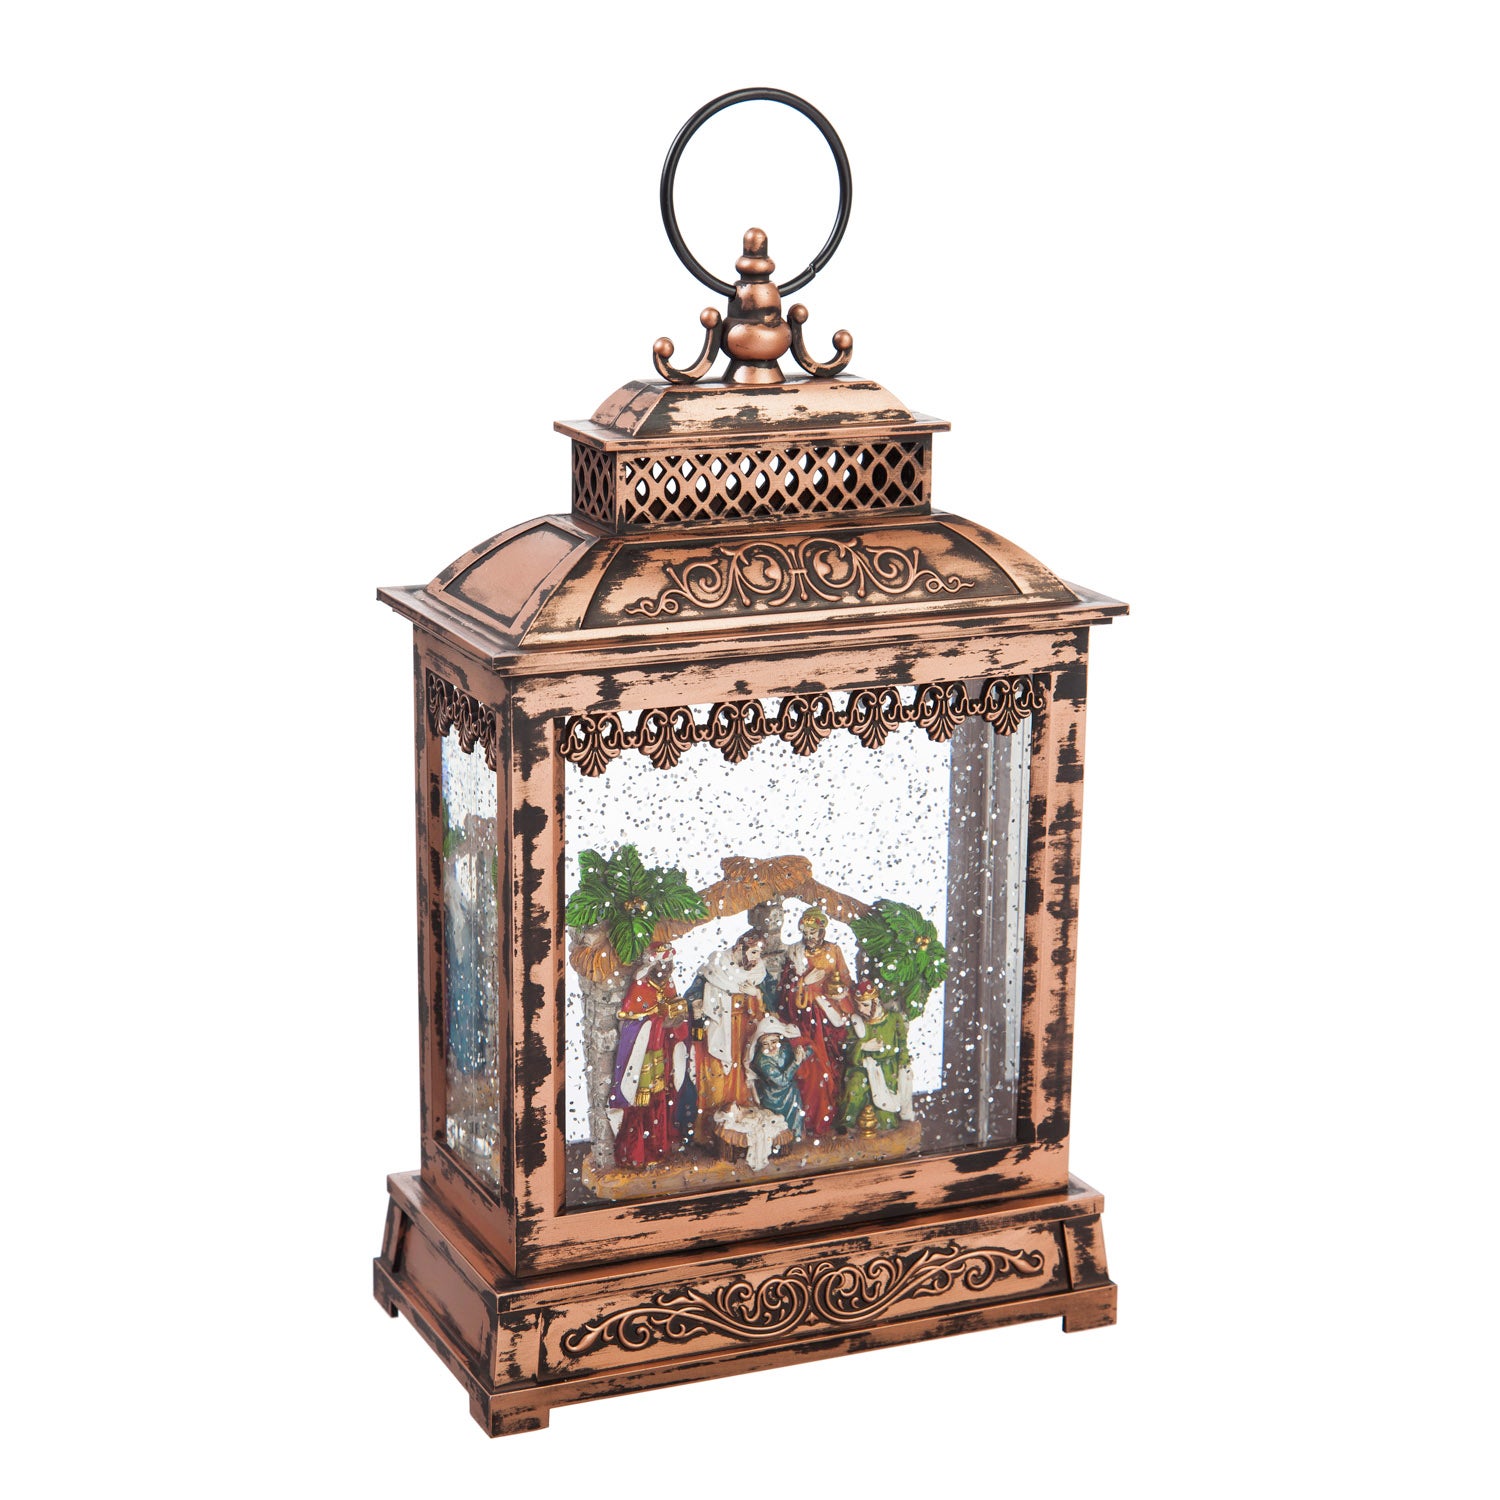 11'' Tall LED Musical Lantern with Spinning Action and Timer function Table Decor, Nativity Scene